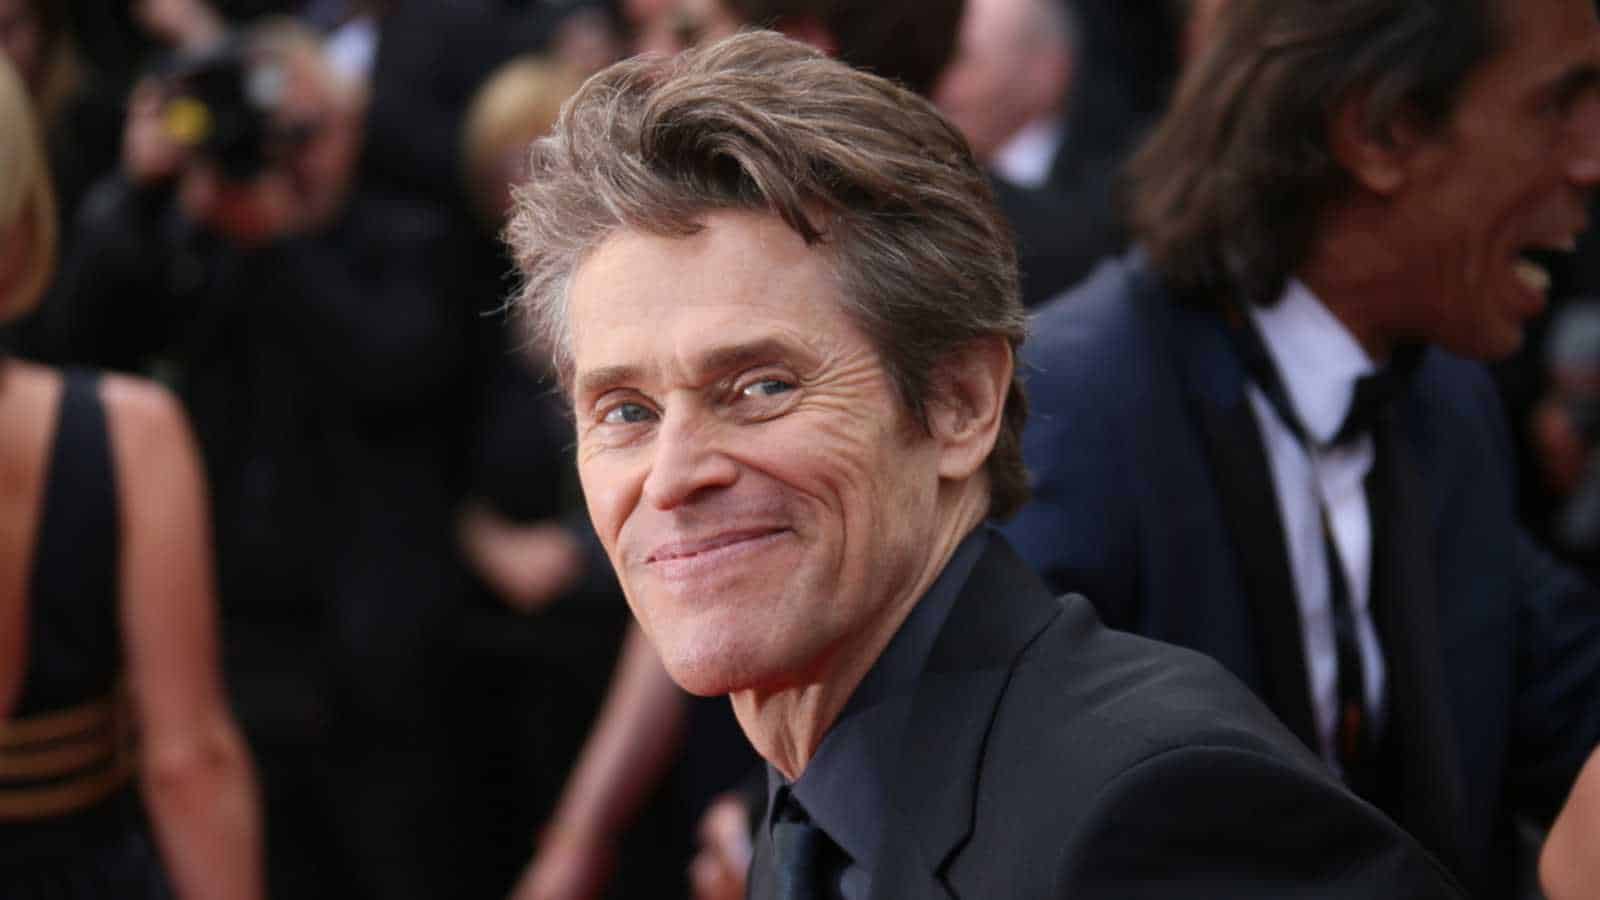 Willem Dafoe attends the Closing Ceremony of the 69th annual Cannes Film Festival at the Palais des Festivals on May 22, 2016 in Cannes, France.